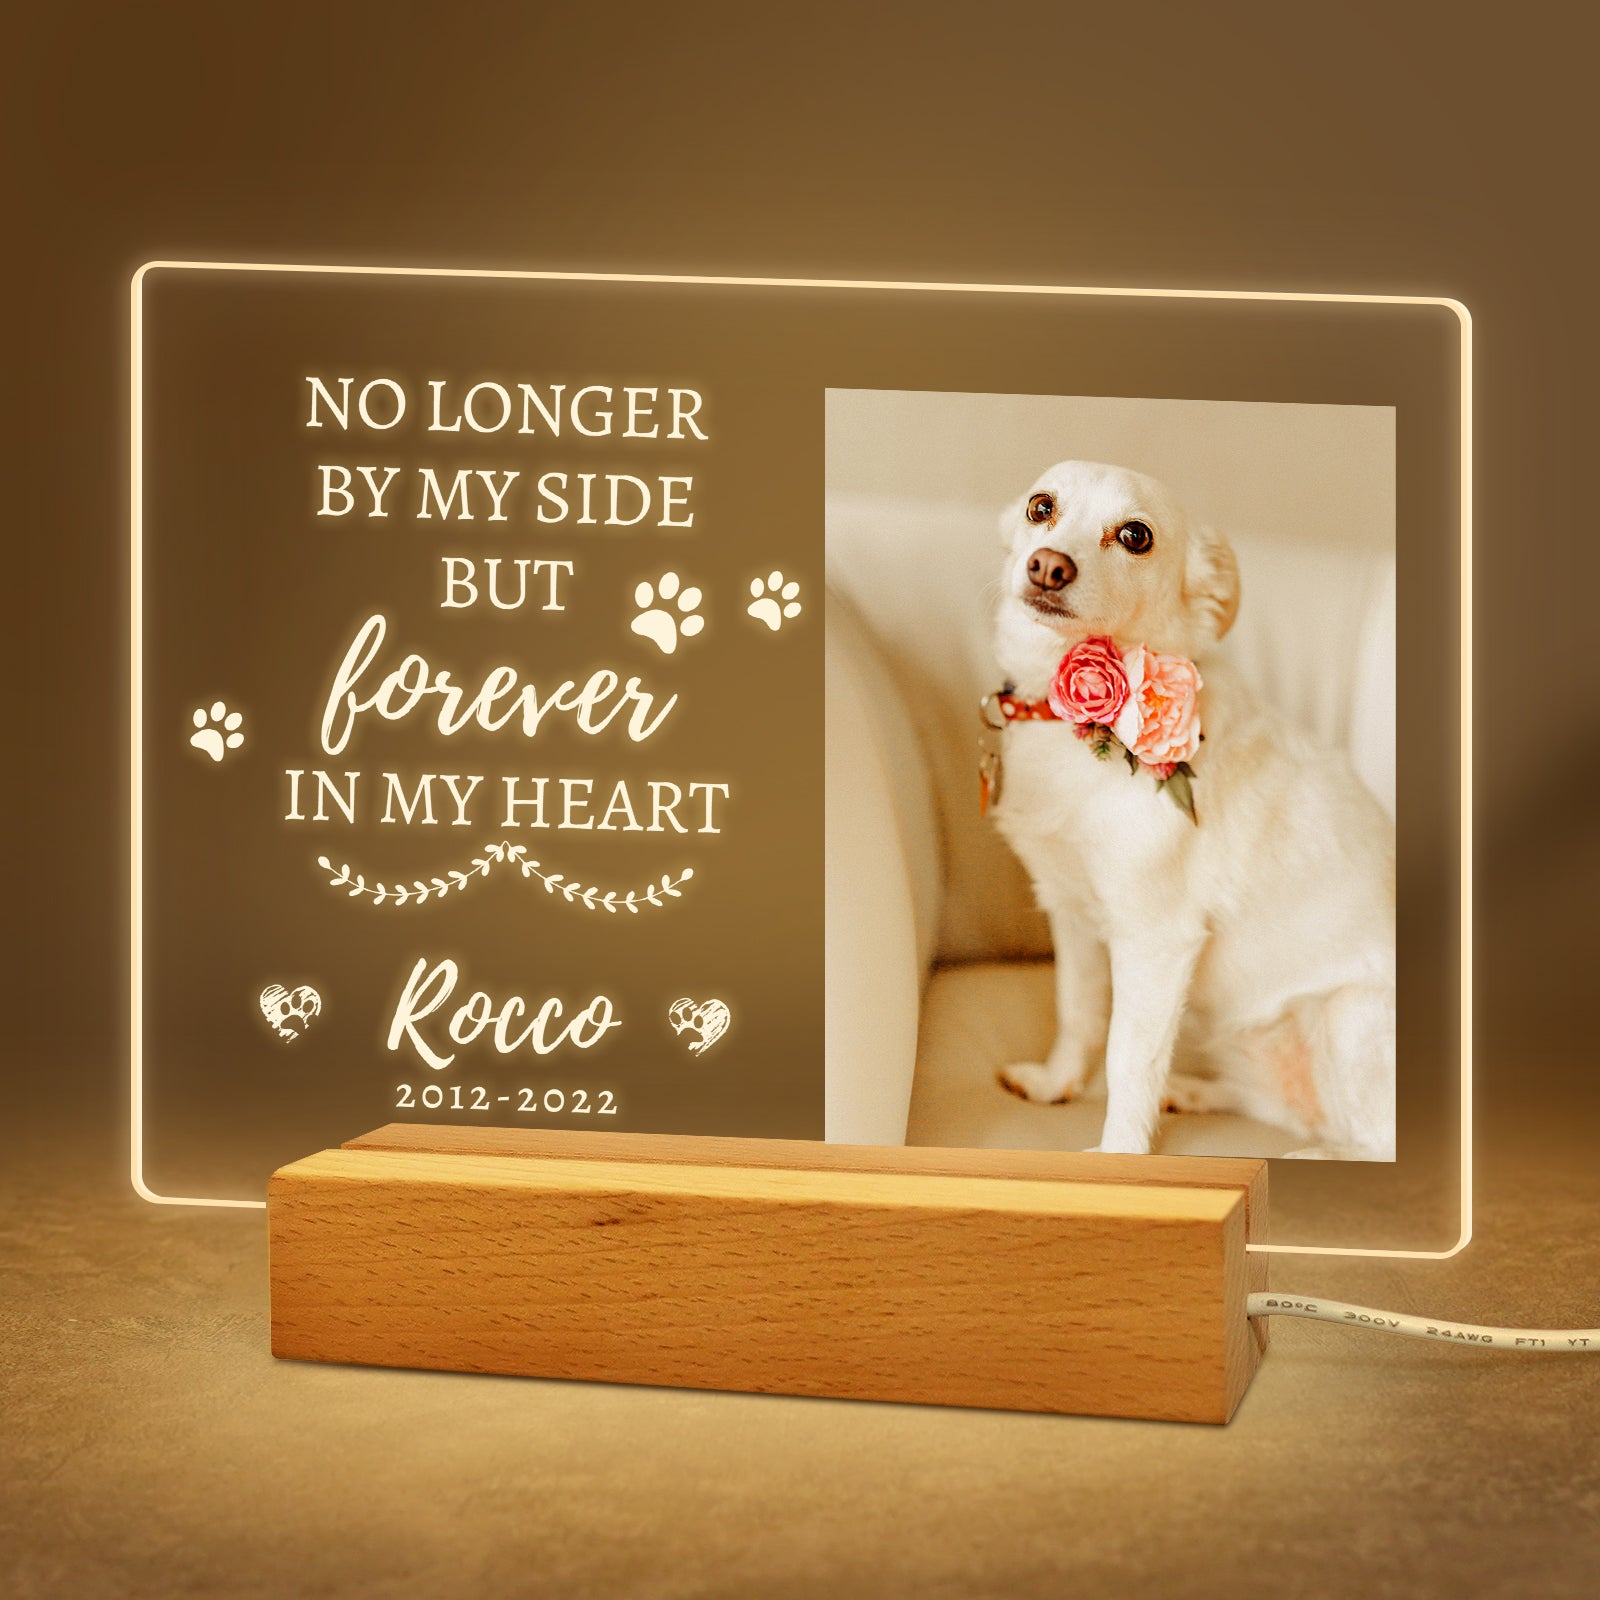 Personalized Pet Memorial Night Light, Dog Memorial Gifts, Loss of Cat or Dog Sympathy Gift